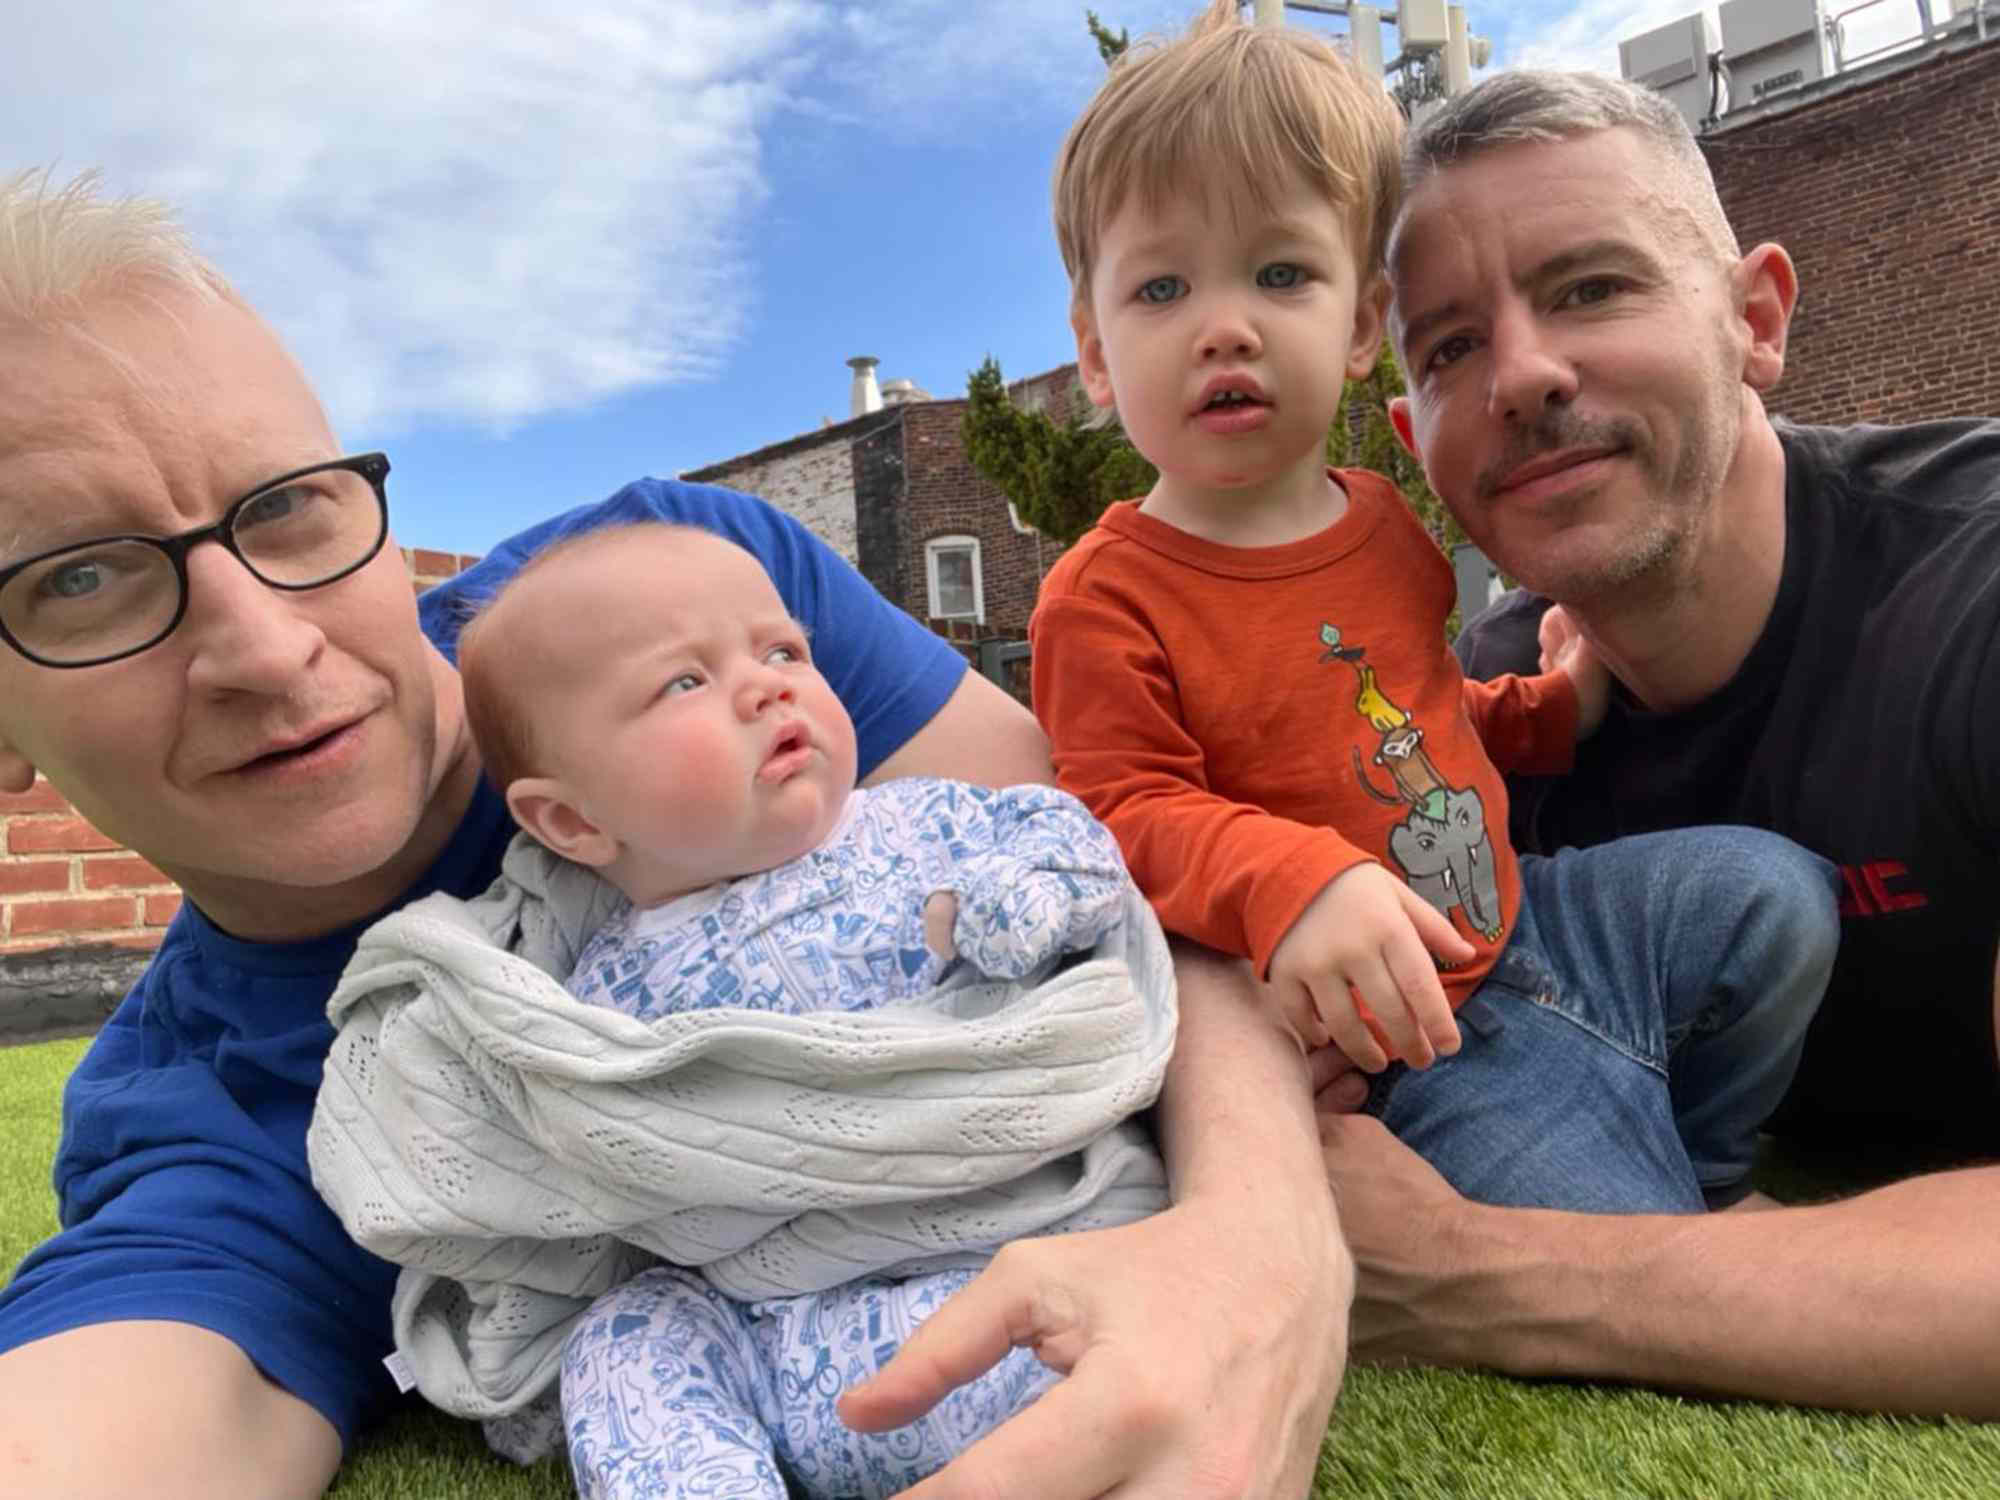 Anderson Cooper's 2 Children: All About Wyatt and Sebastian